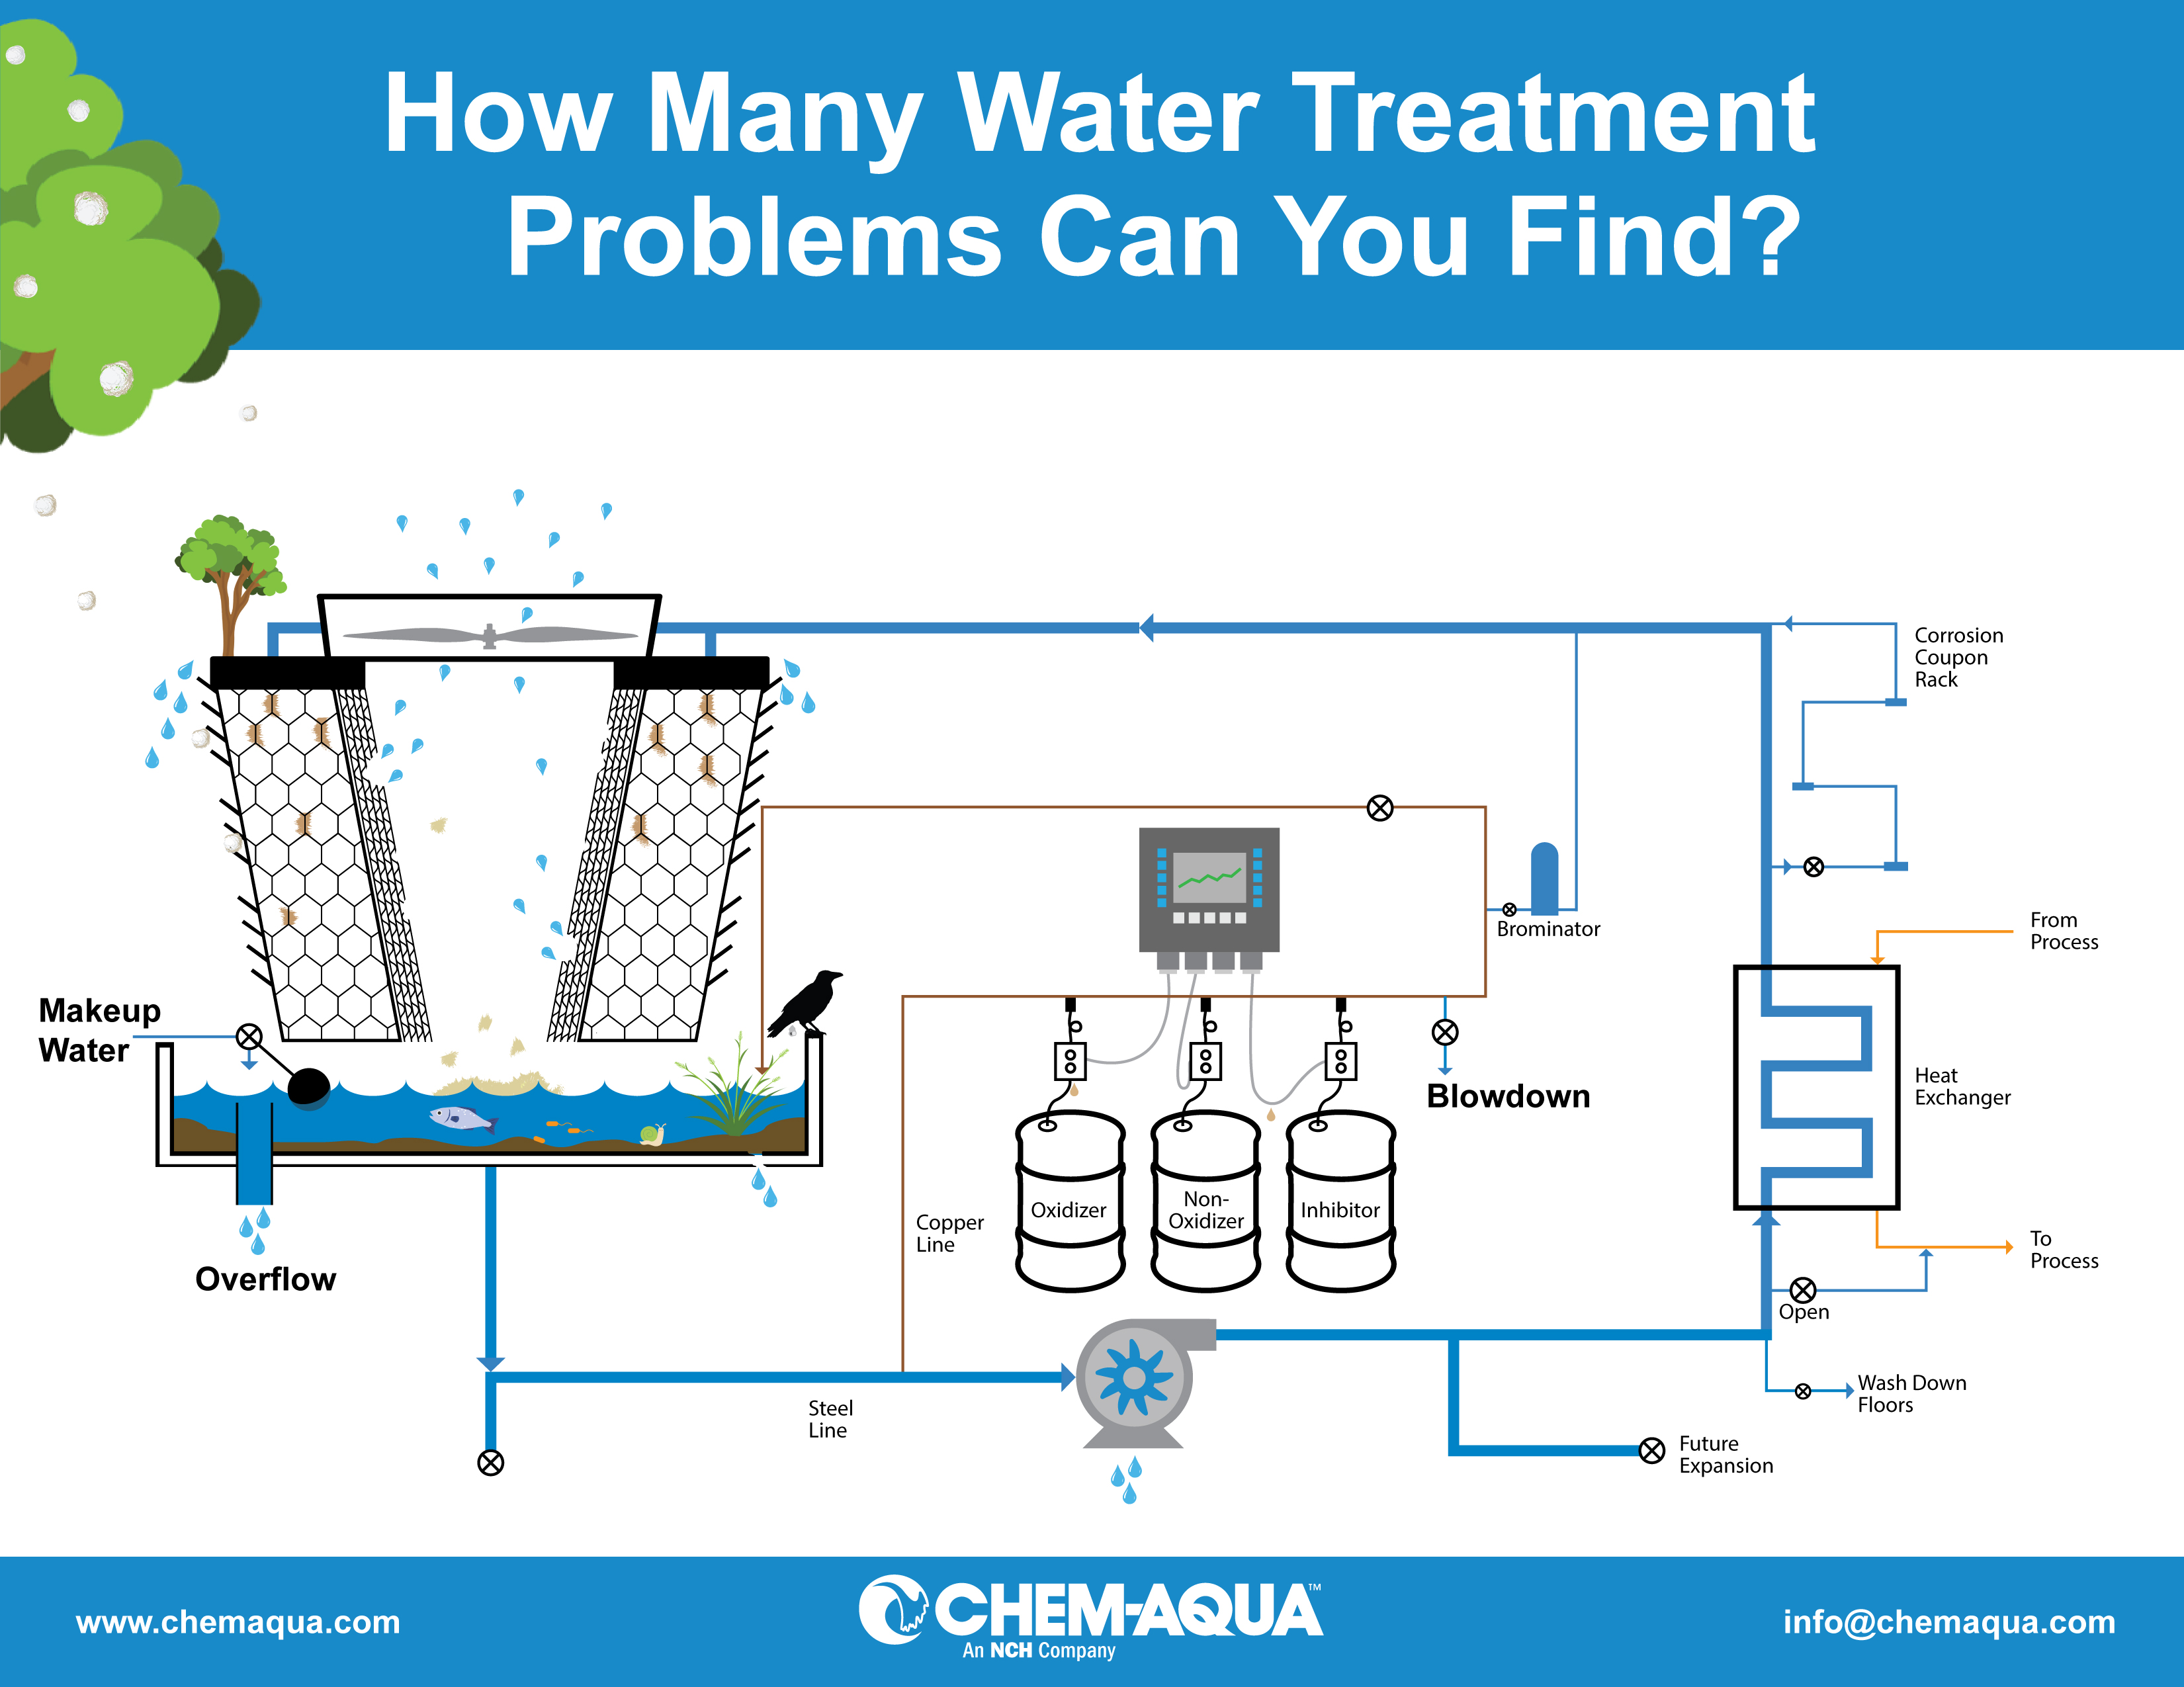 Cooling: How Many Water Treatment Problems Can You Find?